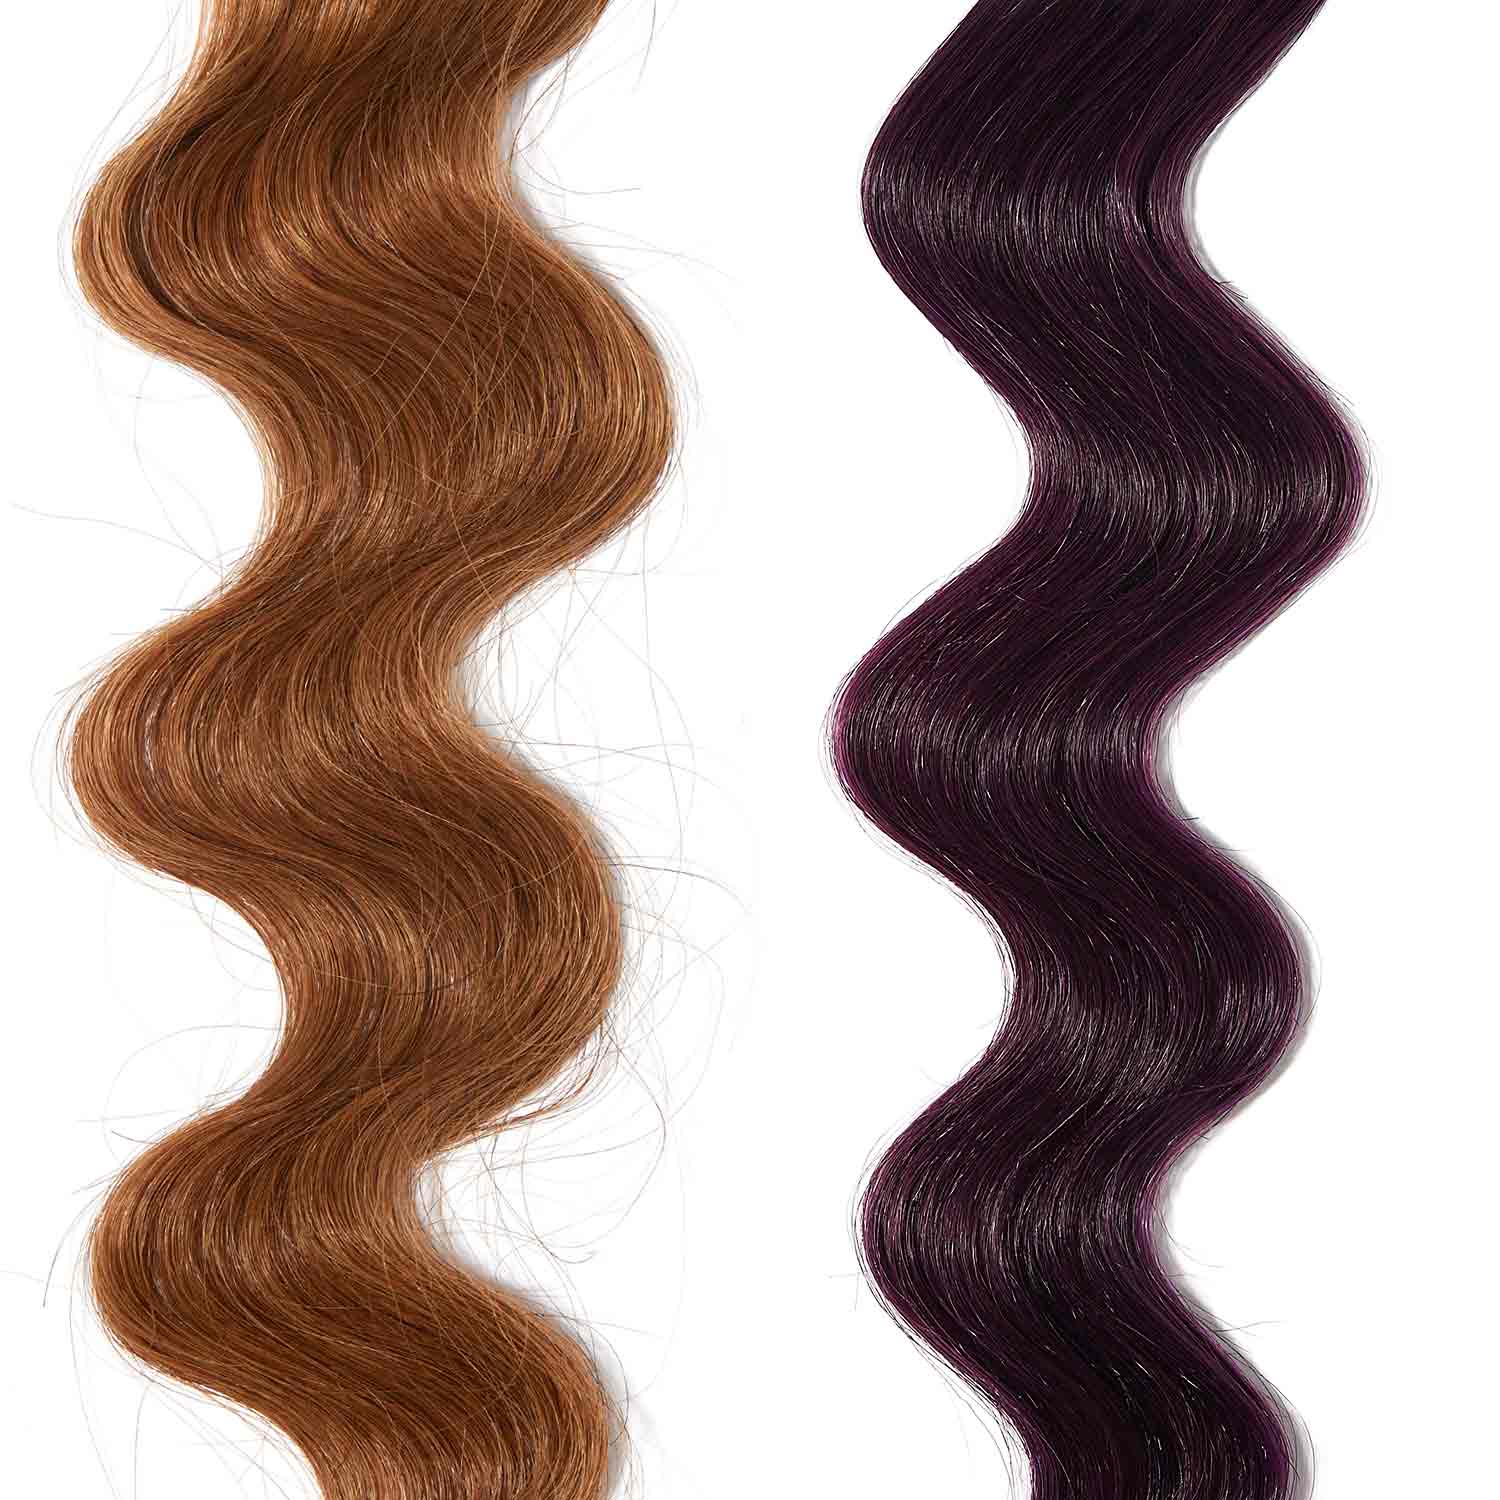 amethyst purple hair color for brown on red hair